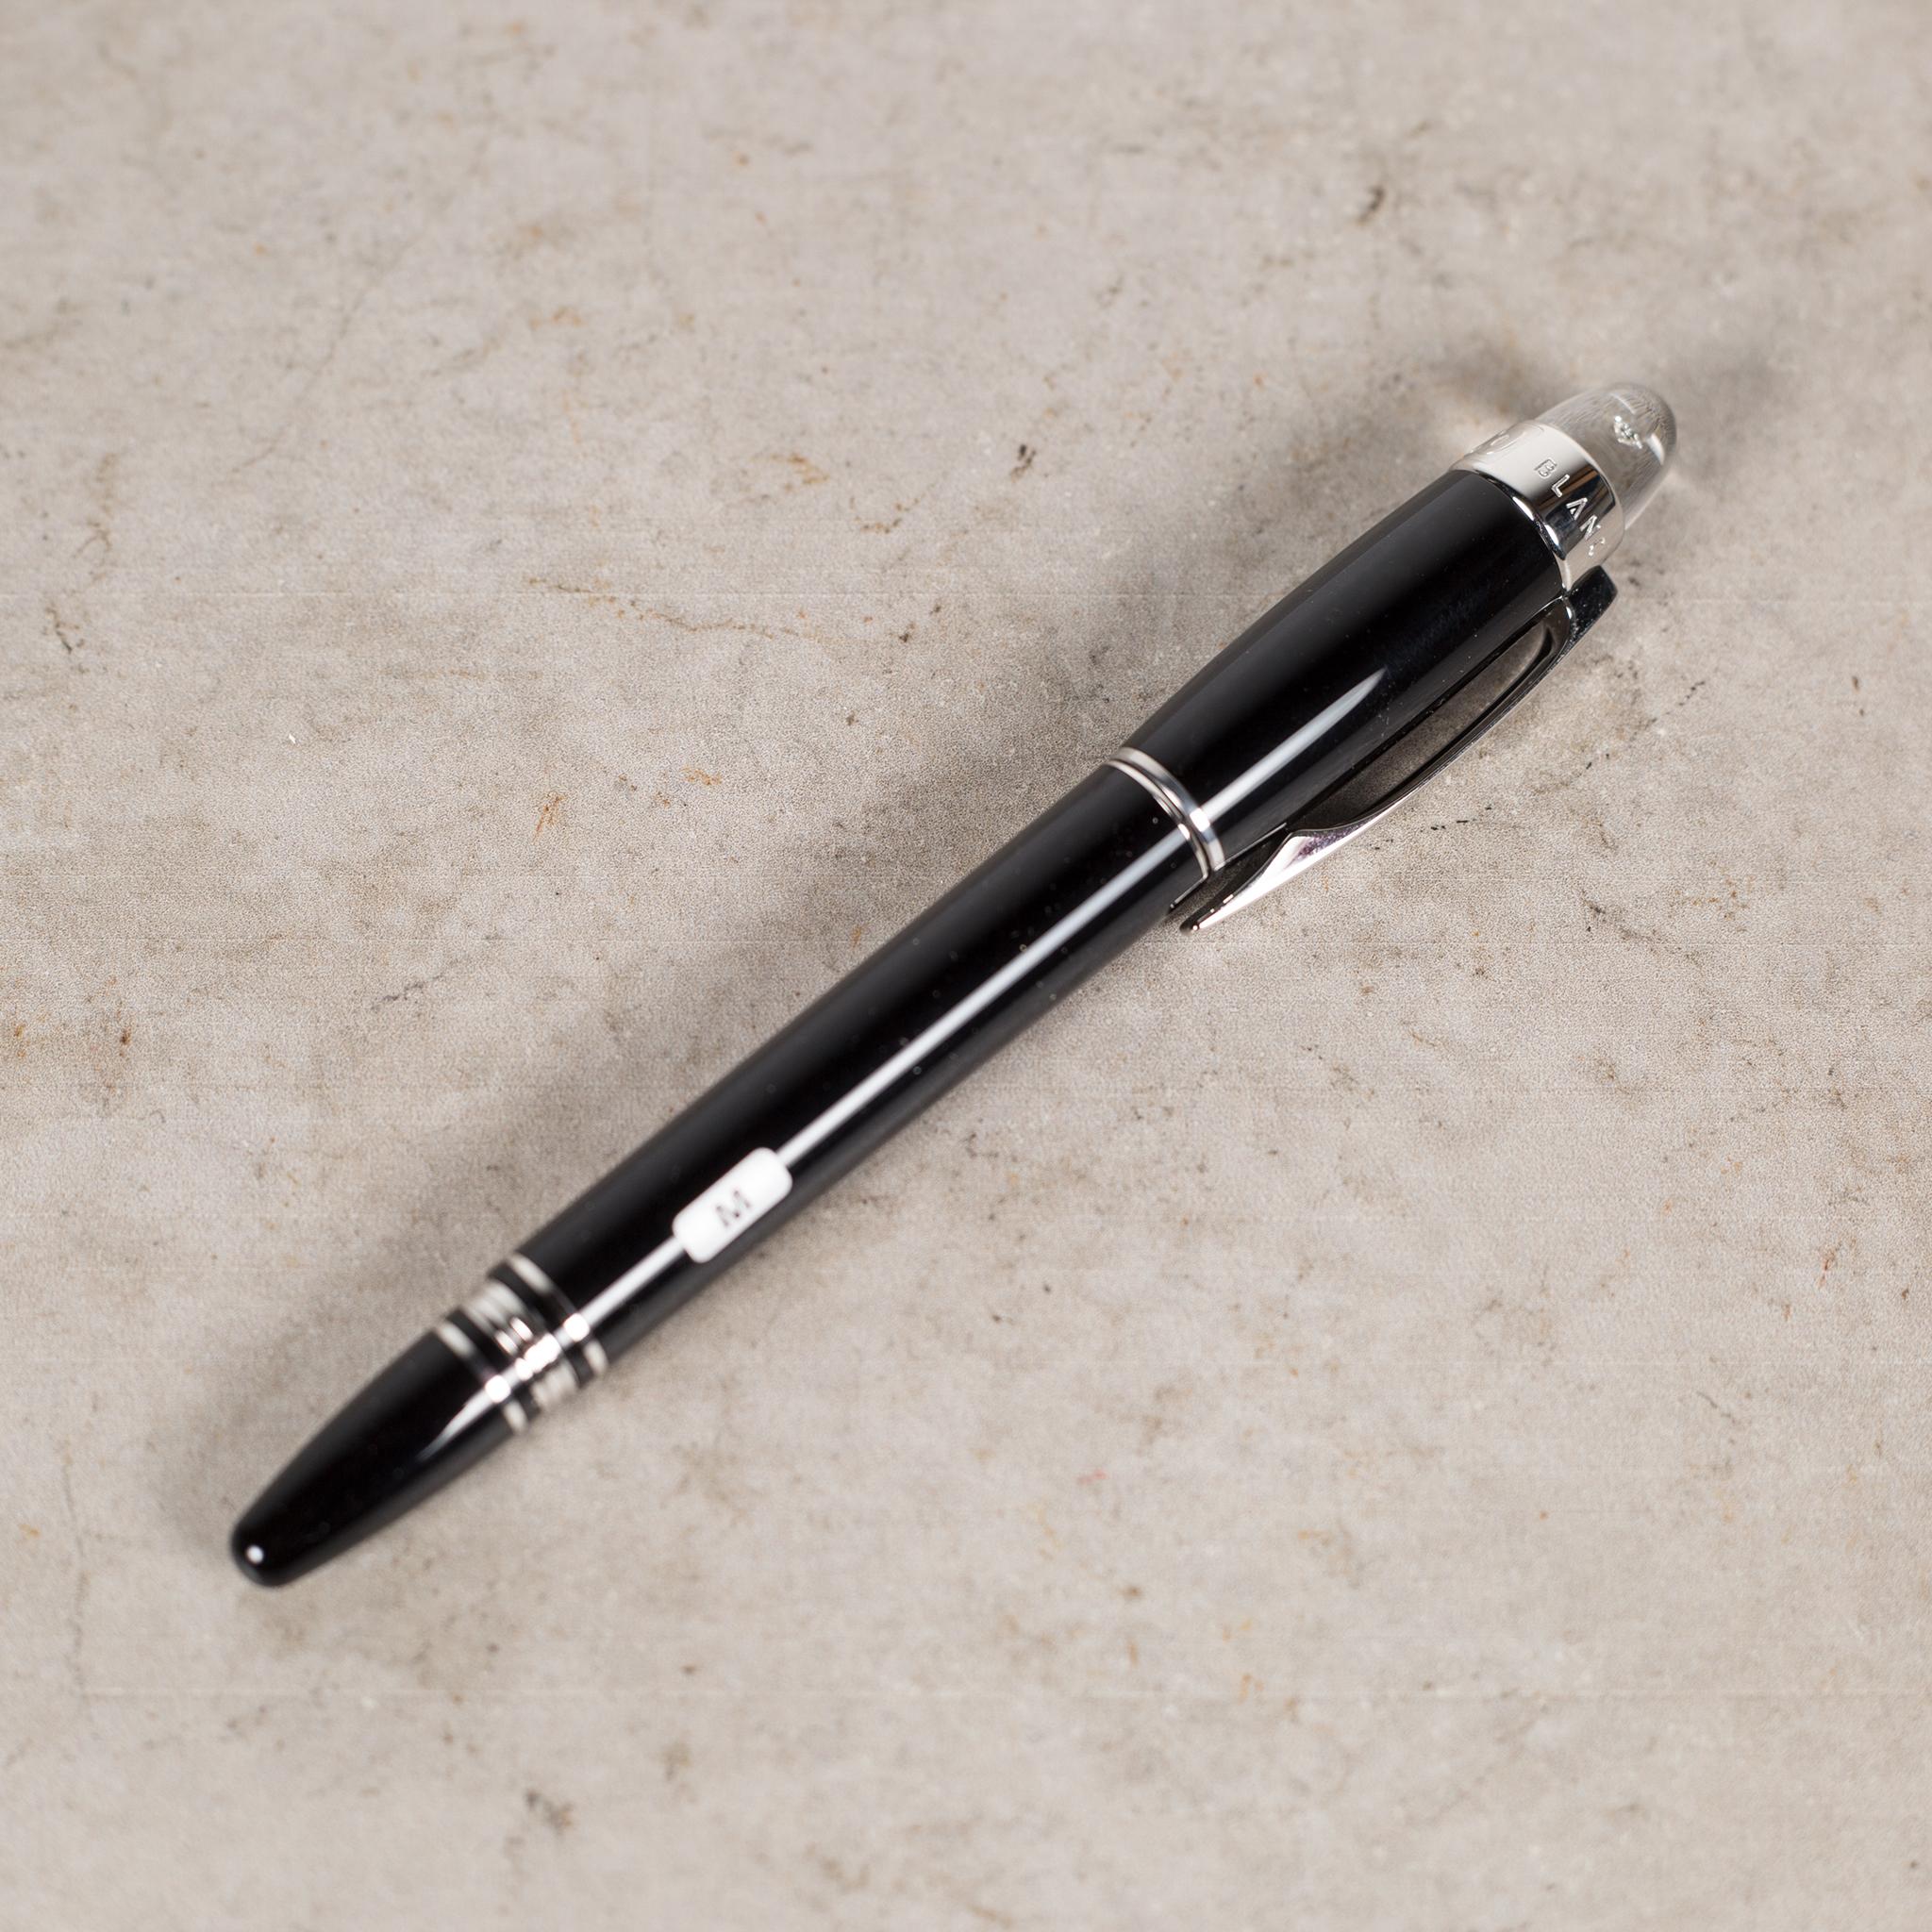 This limited edition fountain pen was released in 2006 to celebrate Montblanc’s 100th anniversary. The pen is made from precious black resin with platinum trims. The CAP top is set with a patented 43-point cut diamond in the shape of the Montblanc